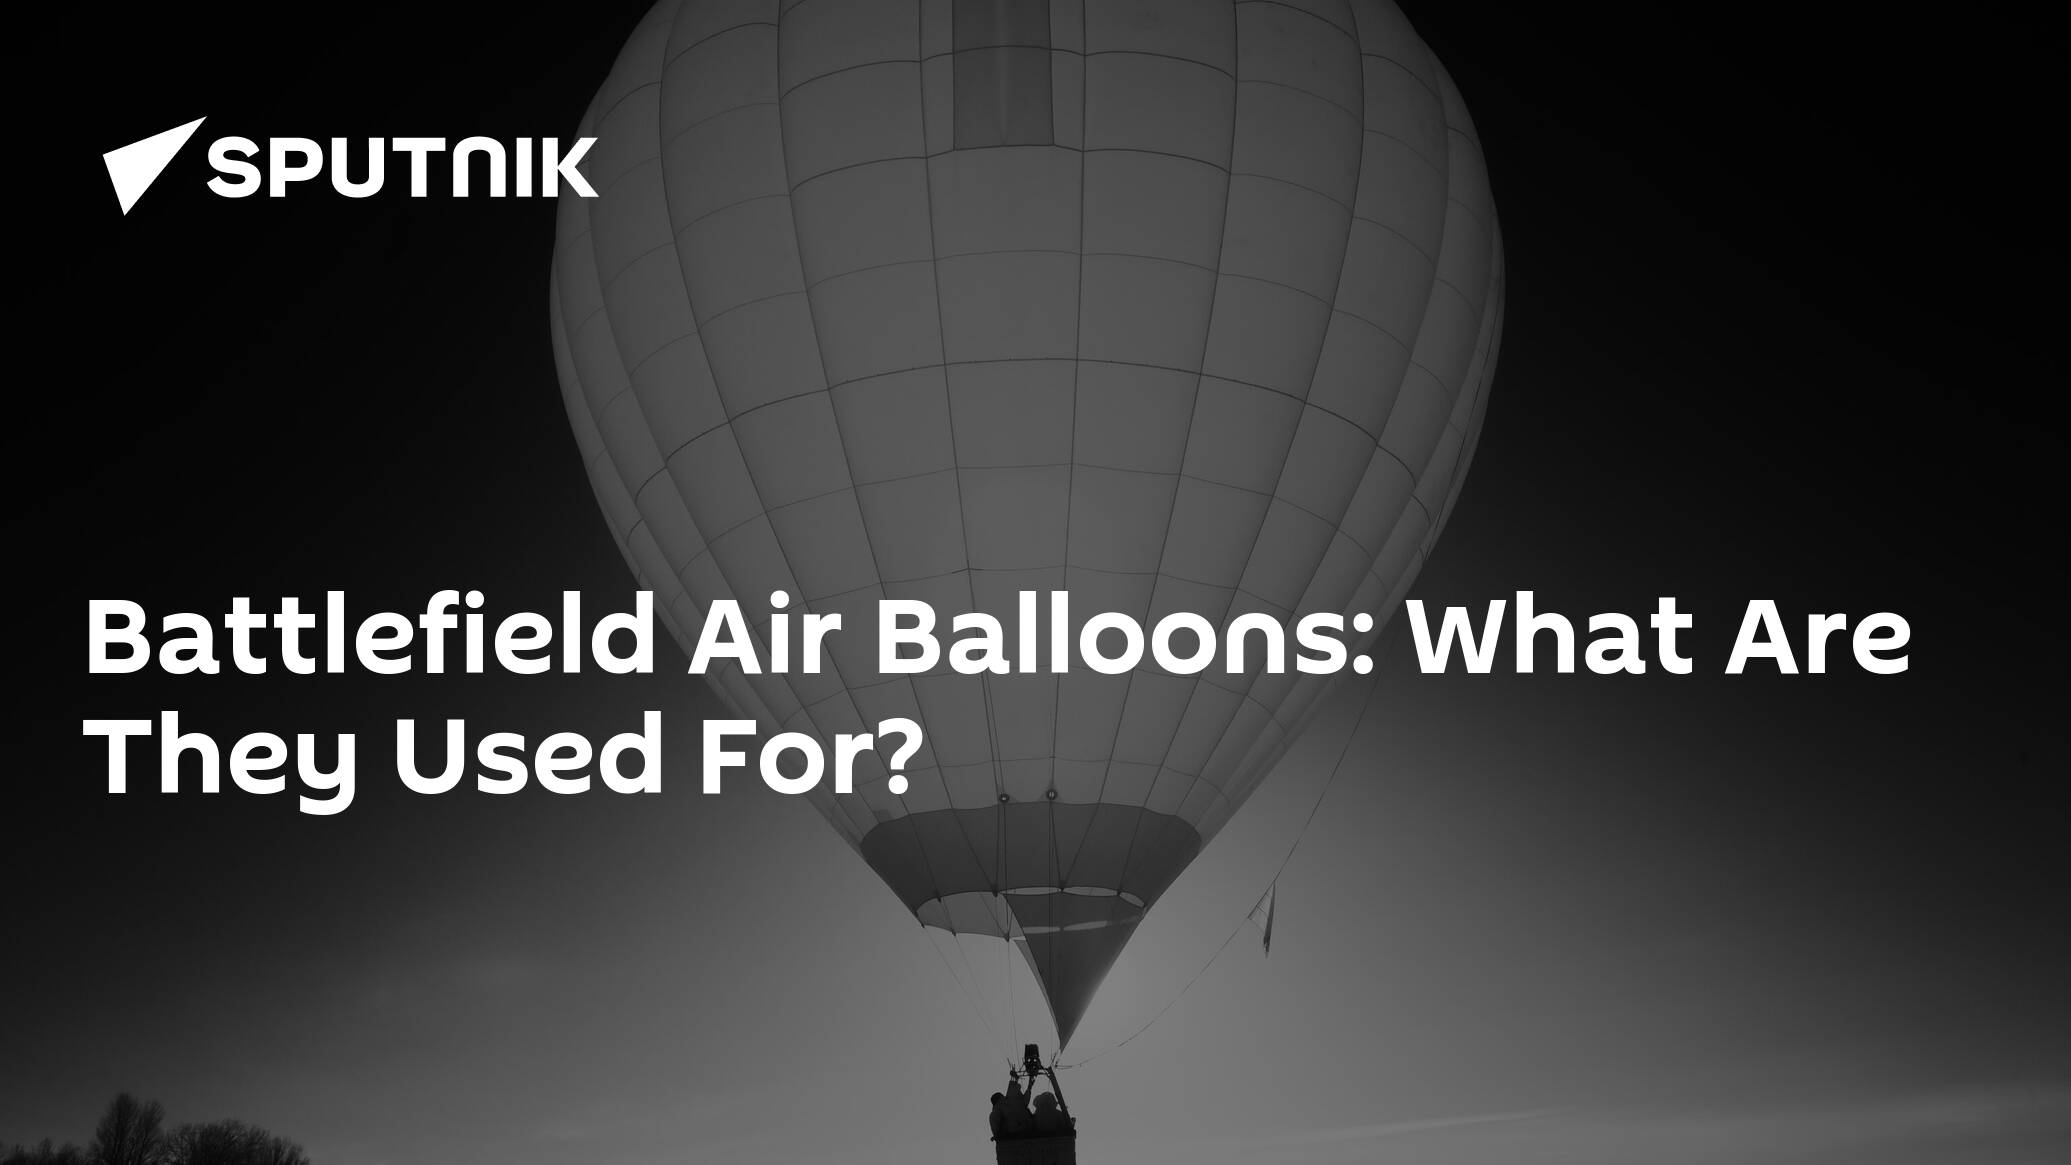 Battlefield Air Balloons: What Are They Used For?